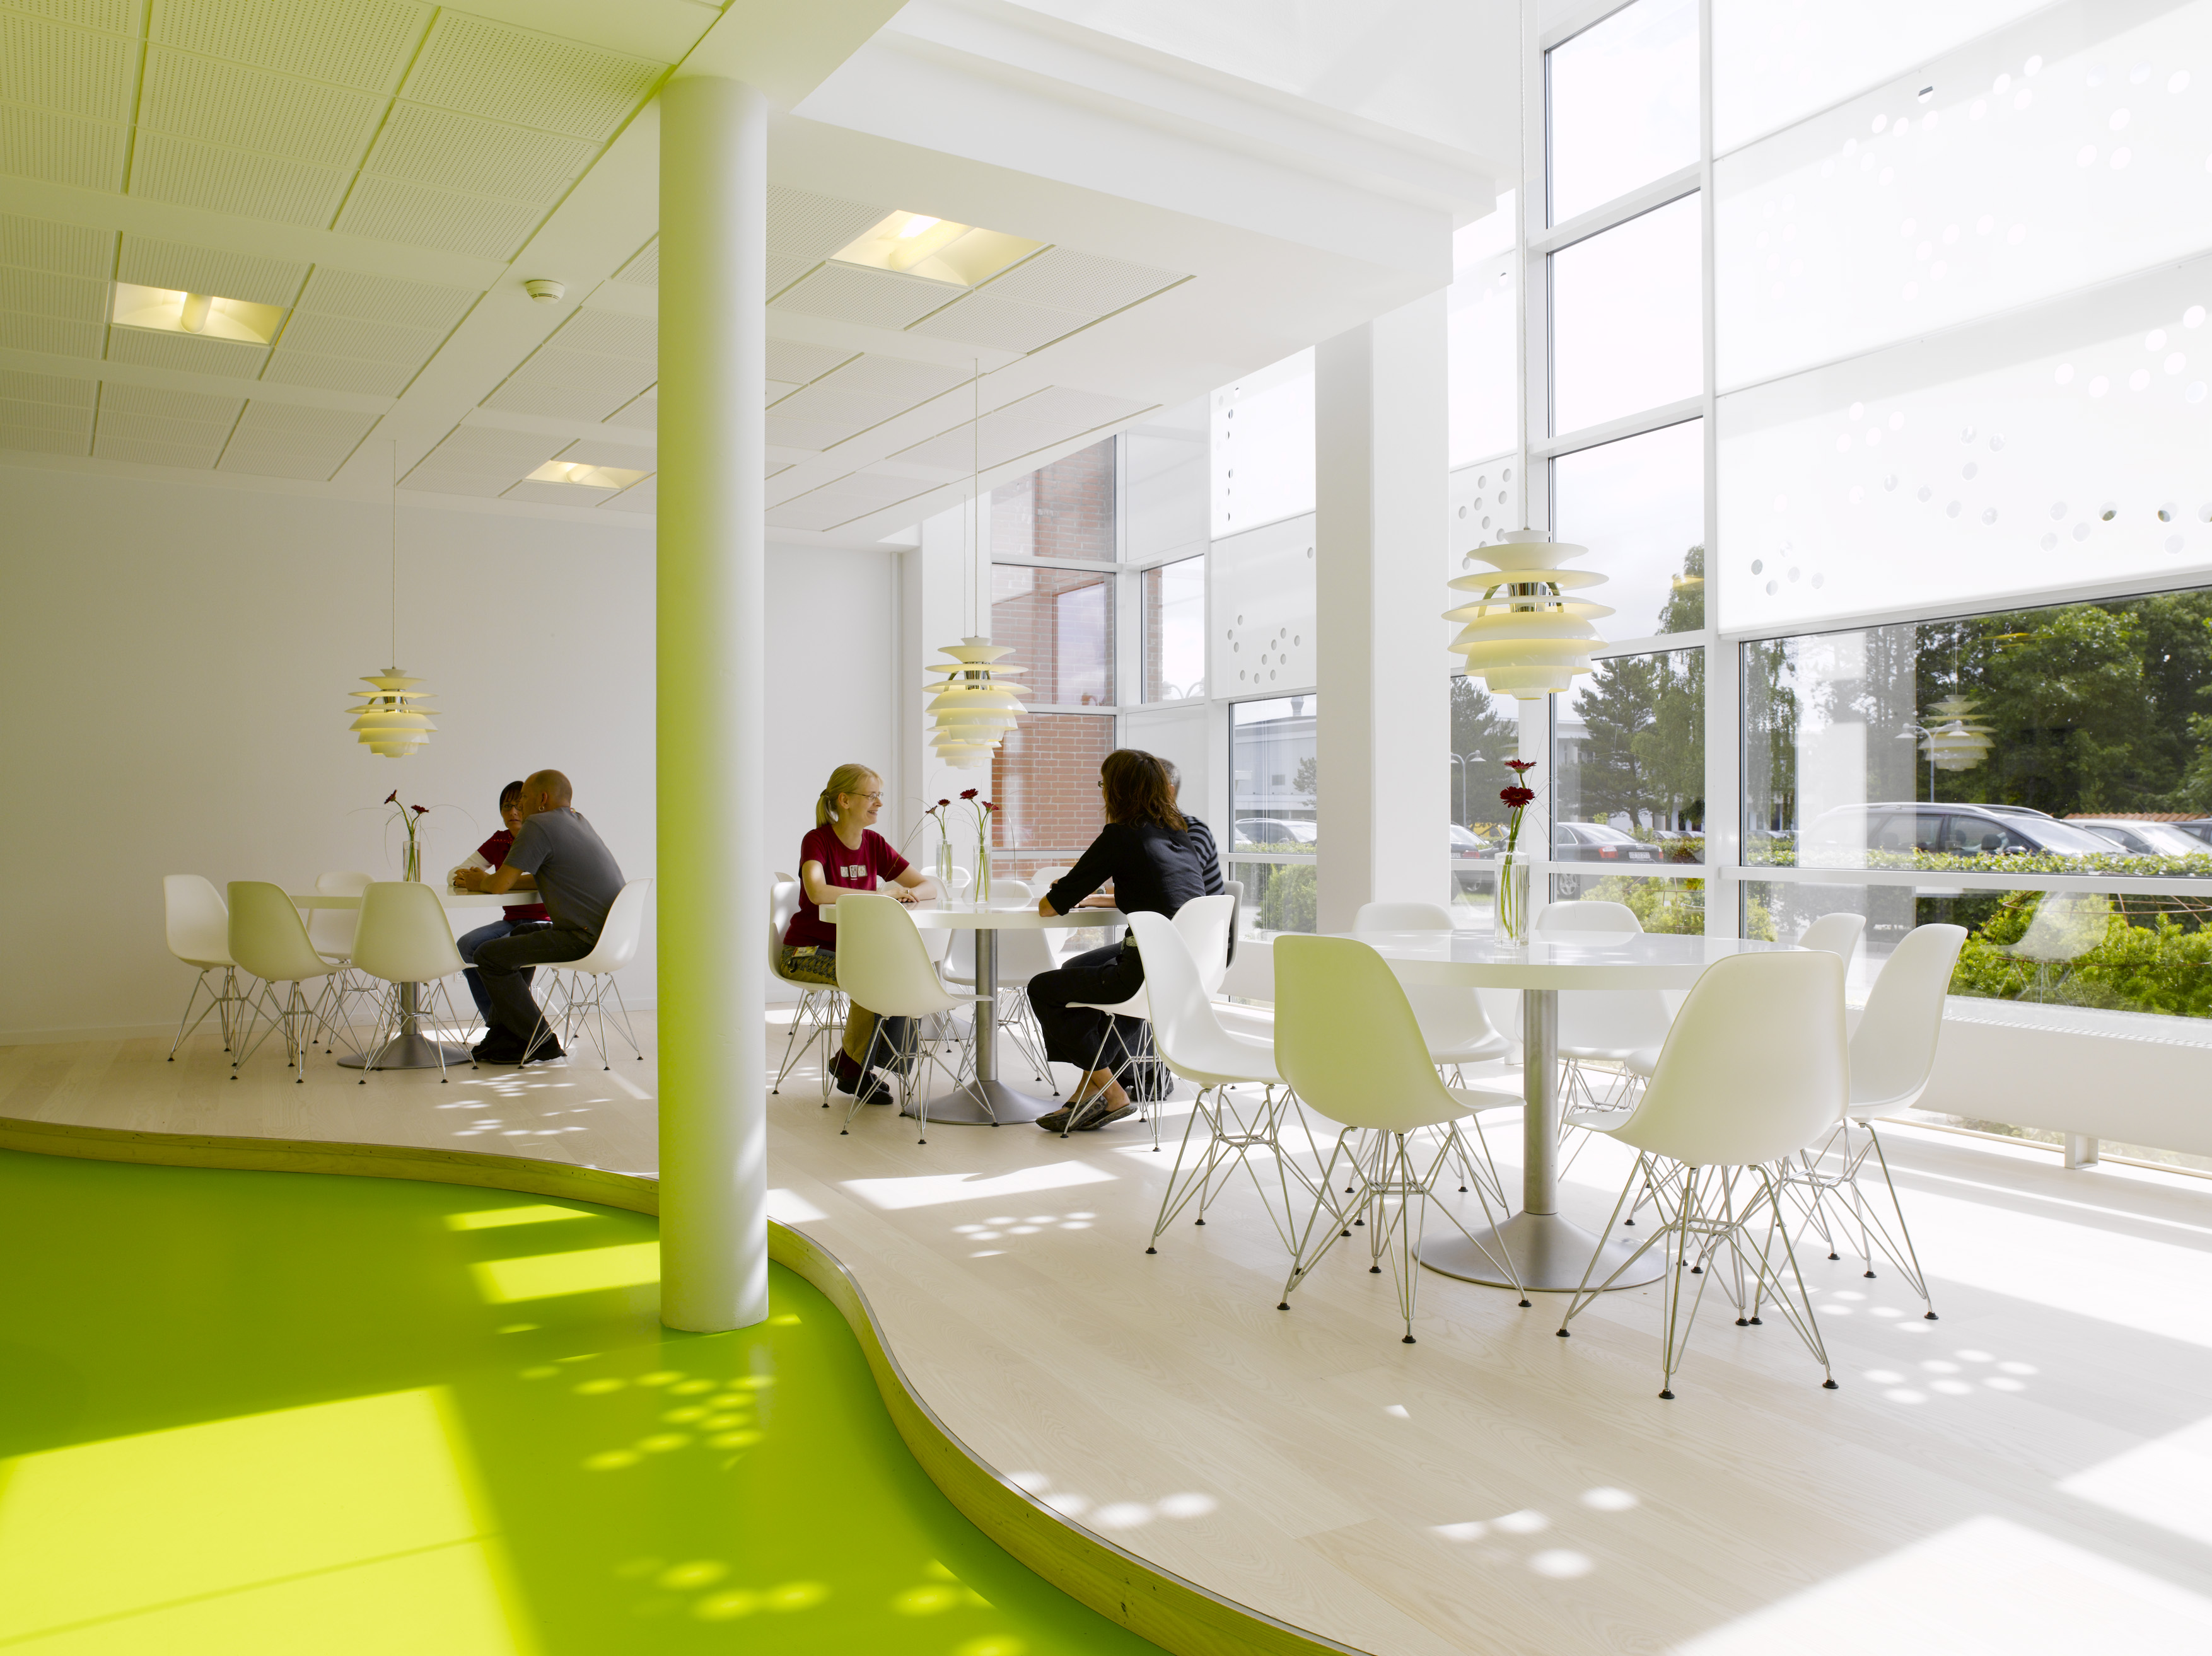 office lego offices lounge interior canteen space cool modern spaces creative denmark interiors quick furniture fjord vibrant play workplace area